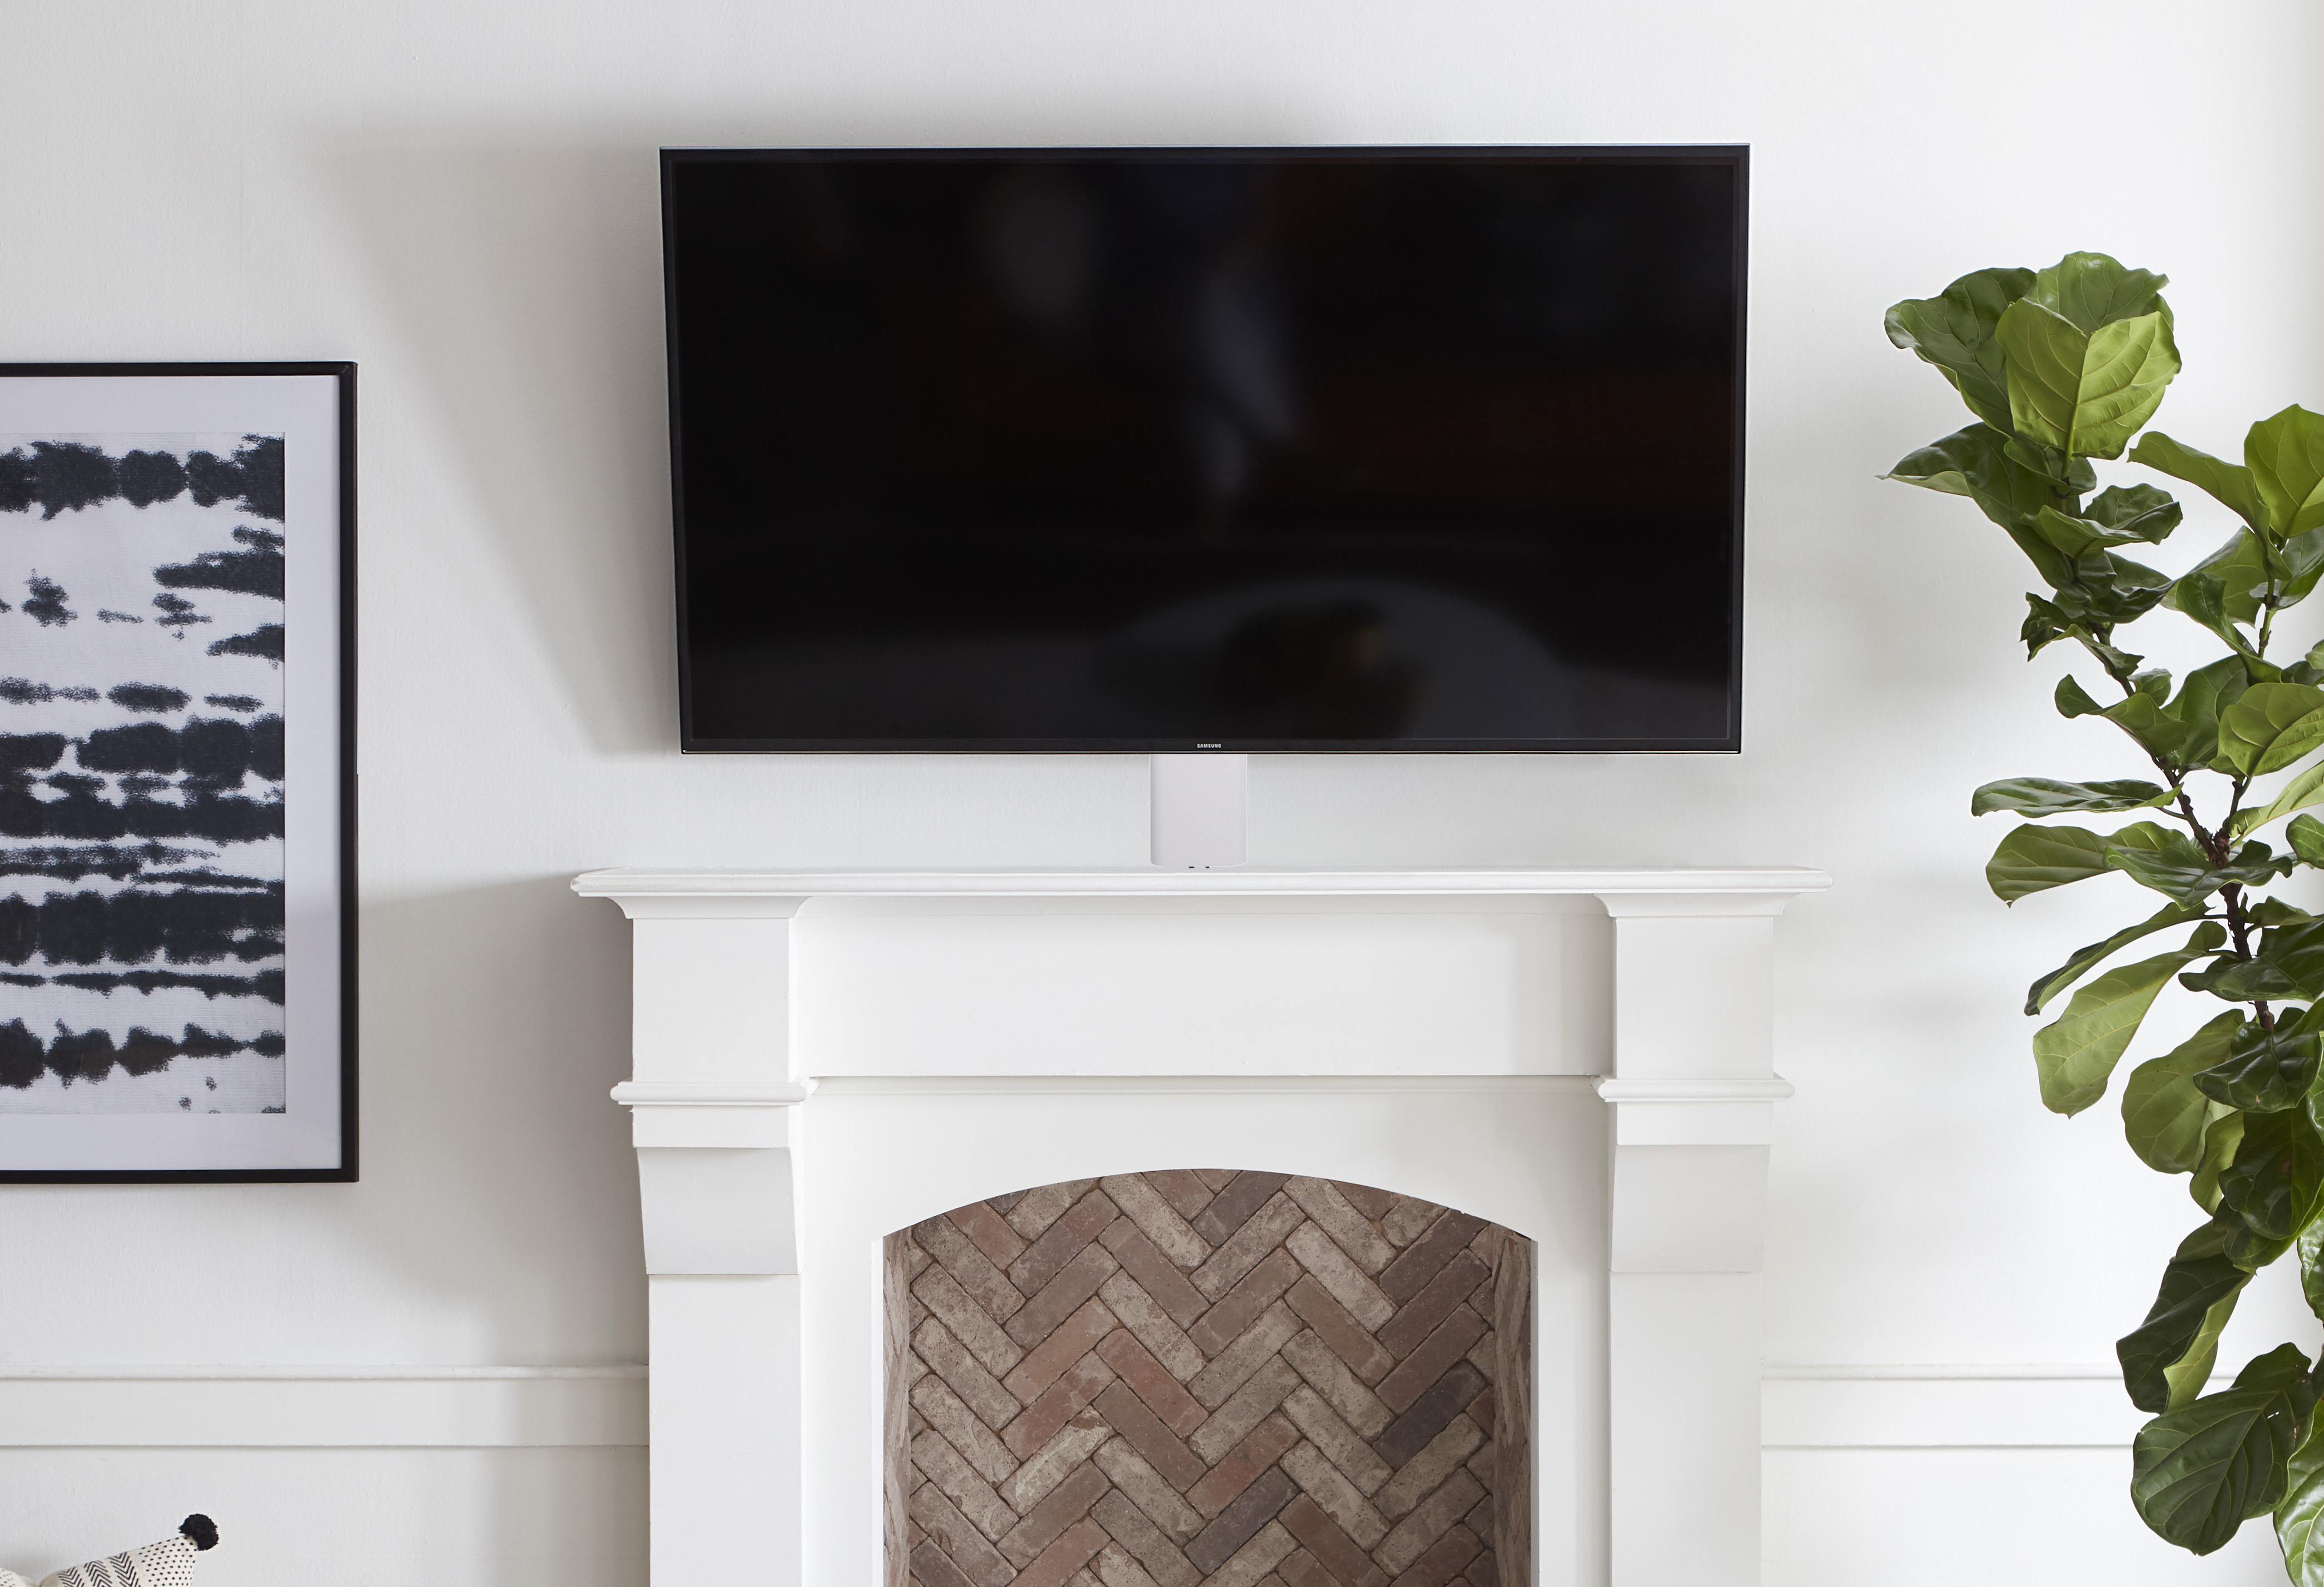 https://cdn10.bigcommerce.com/s-p67zny4ulb/product_images/uploaded_images/cablecover-mantel-embedjpg.jpeg